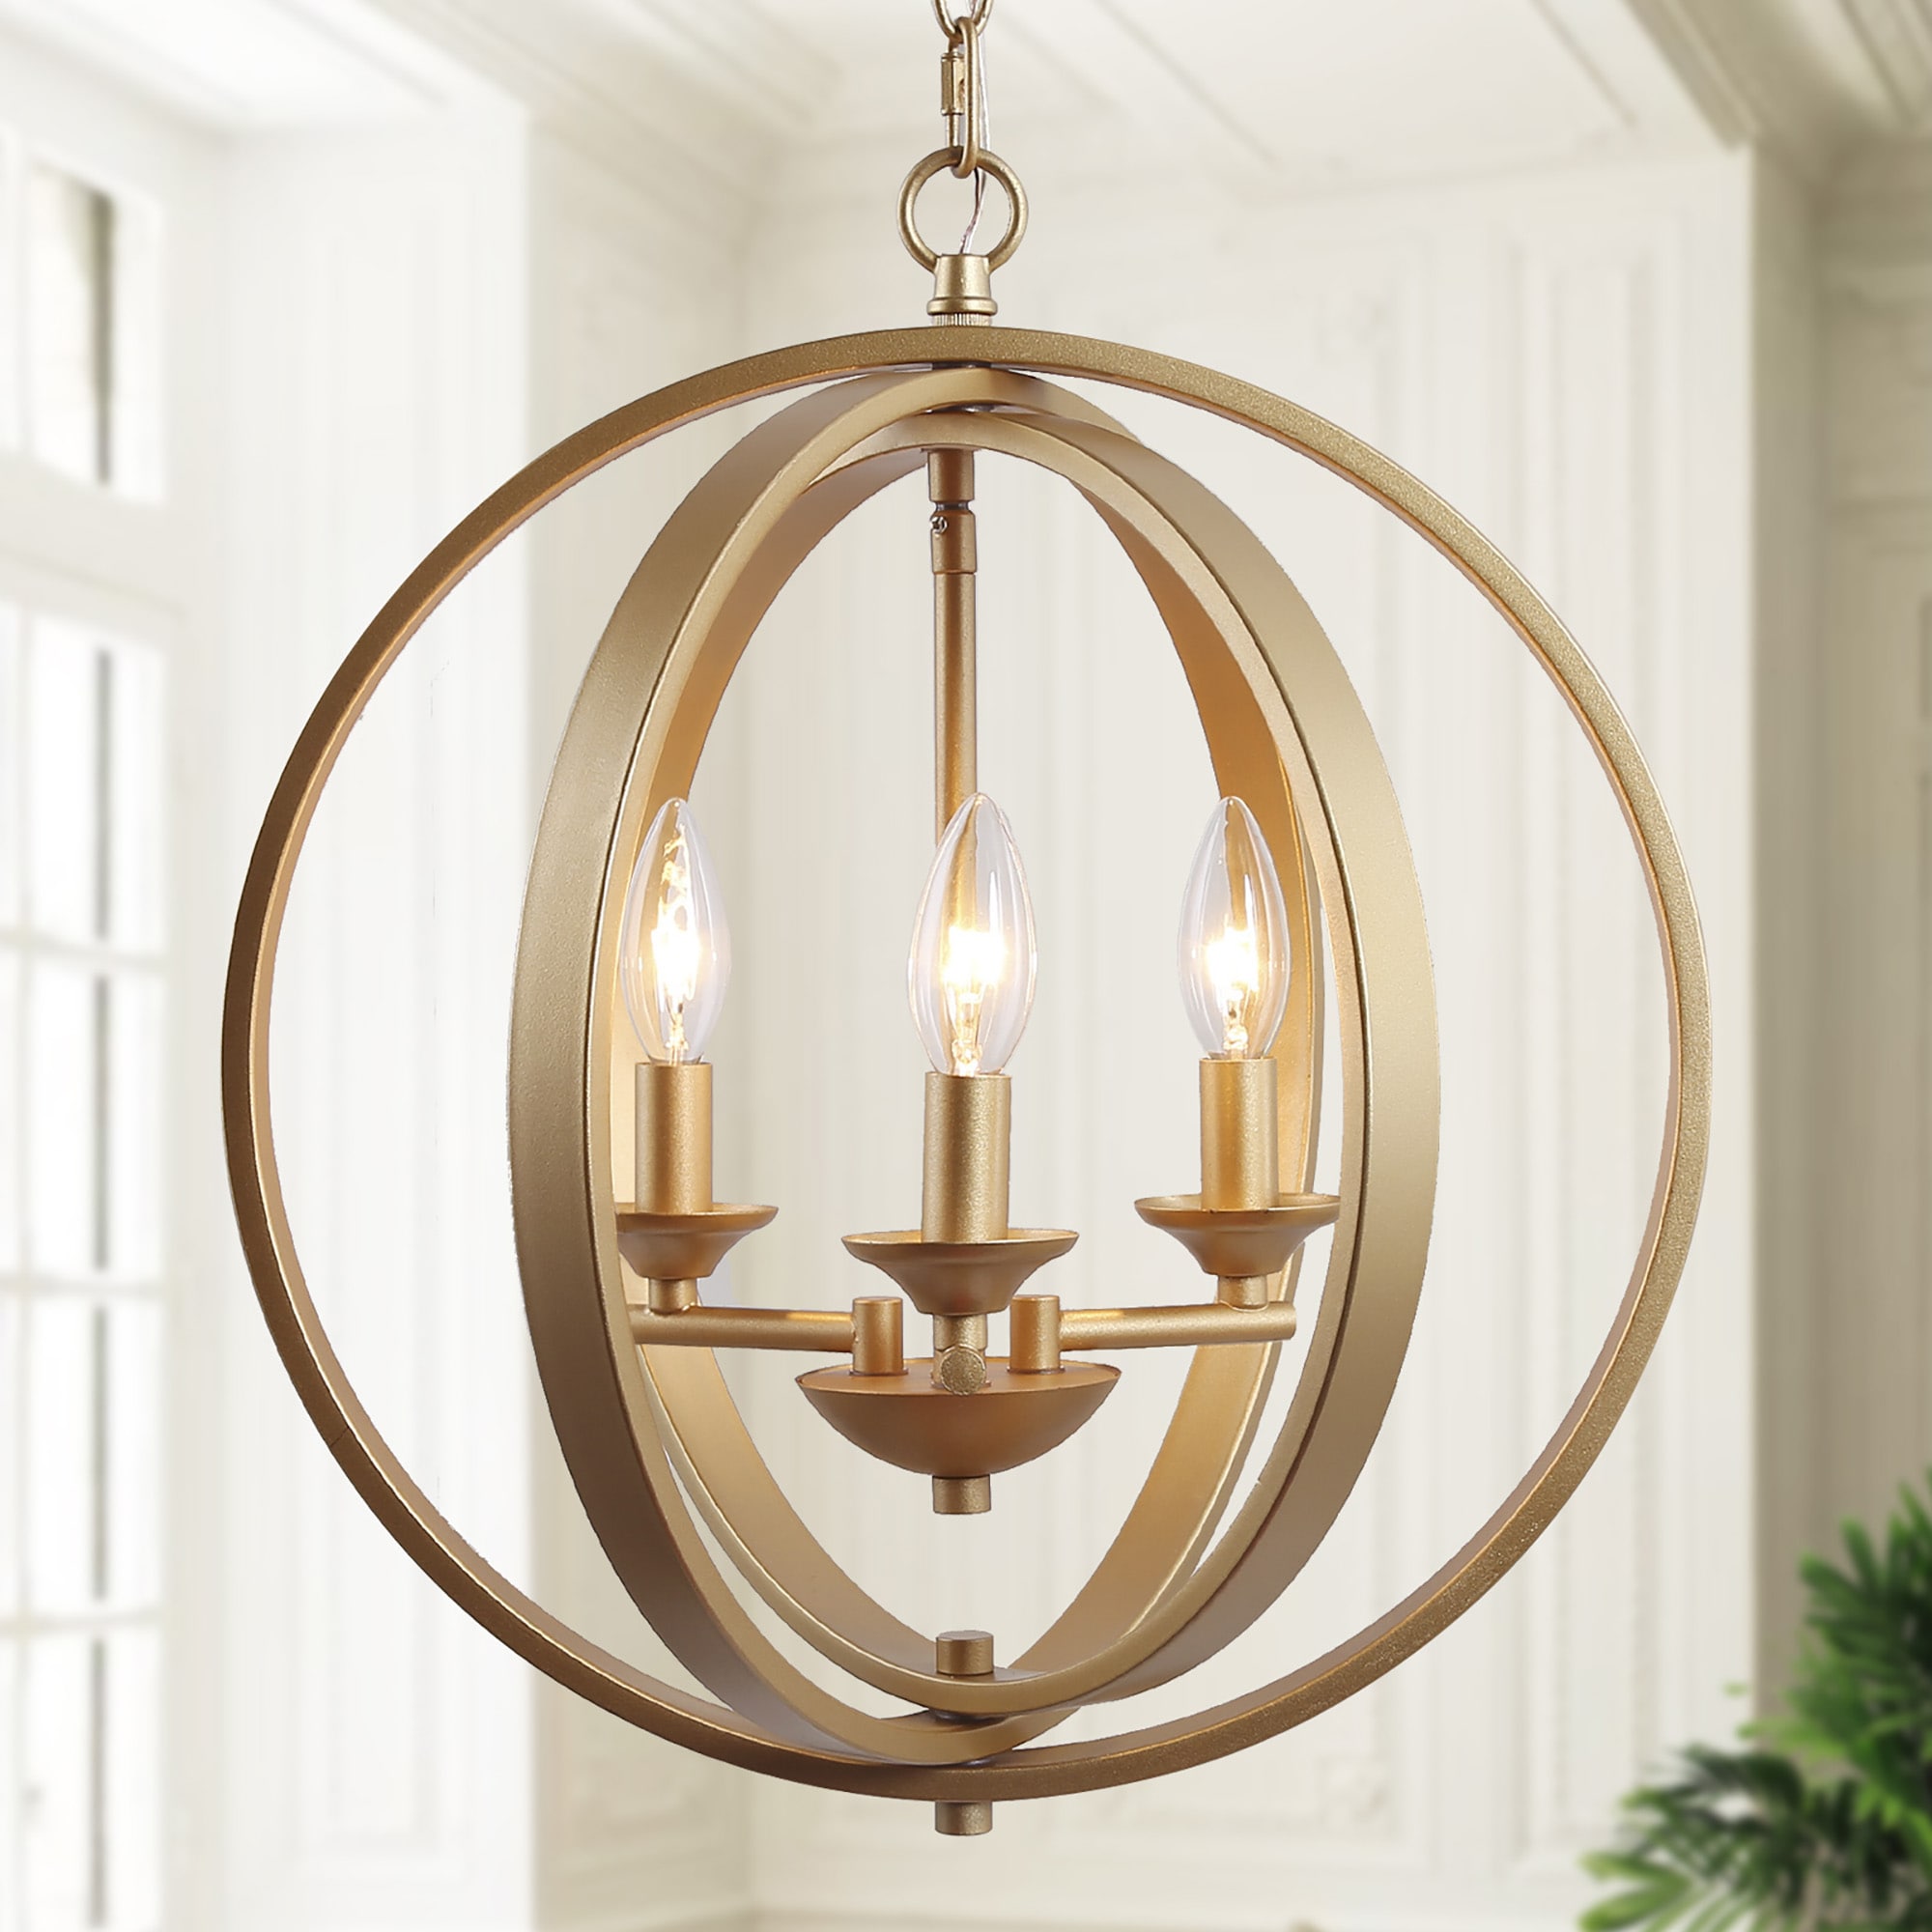 Uolfin 3-Light Gold Globe at rated Modern/Contemporary Style Classic LED with department the Chandelier Candle Dry Chandeliers in